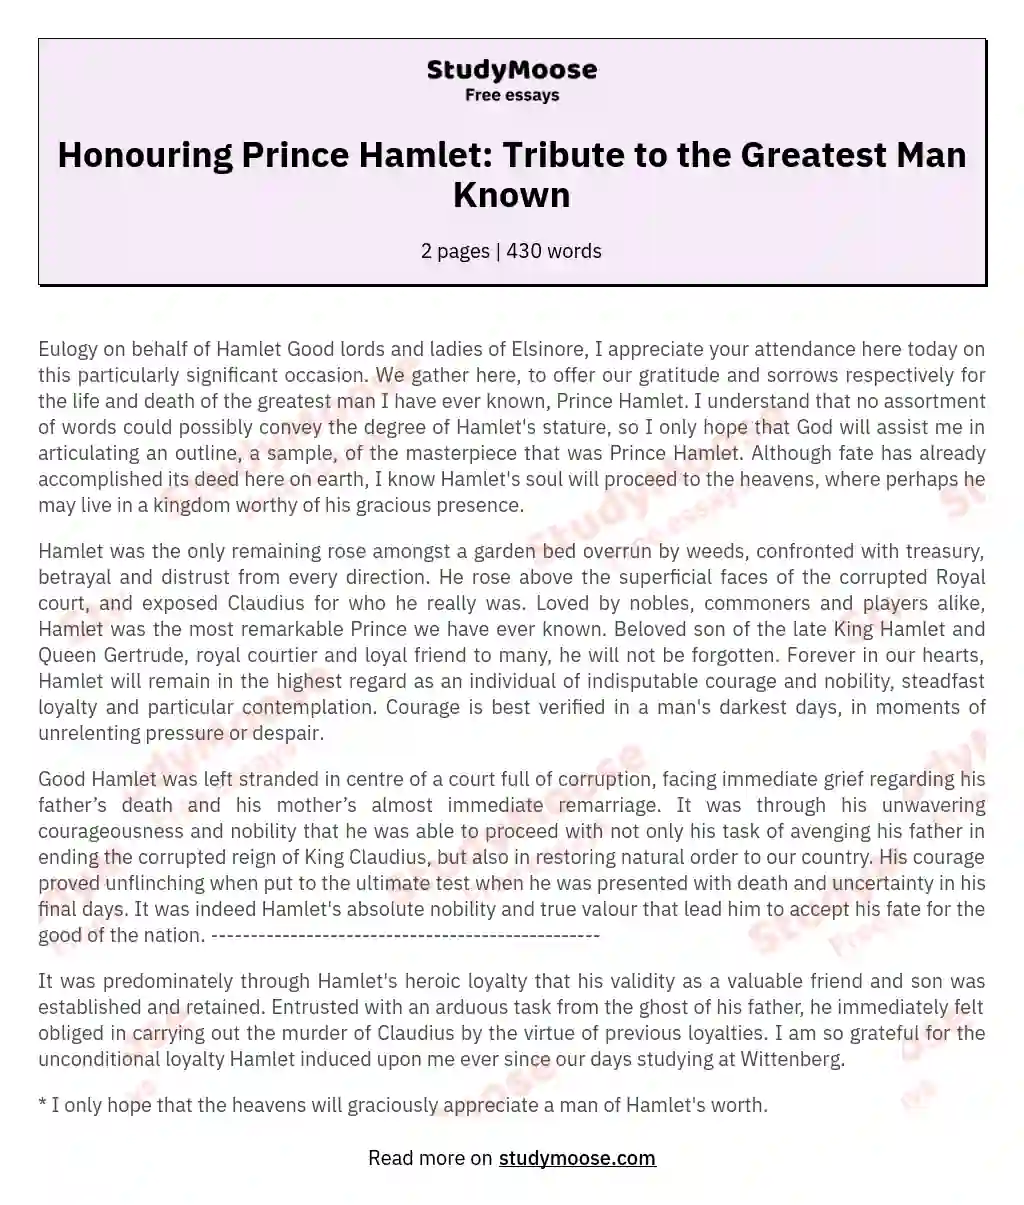 Honouring Prince Hamlet: Tribute to the Greatest Man Known essay